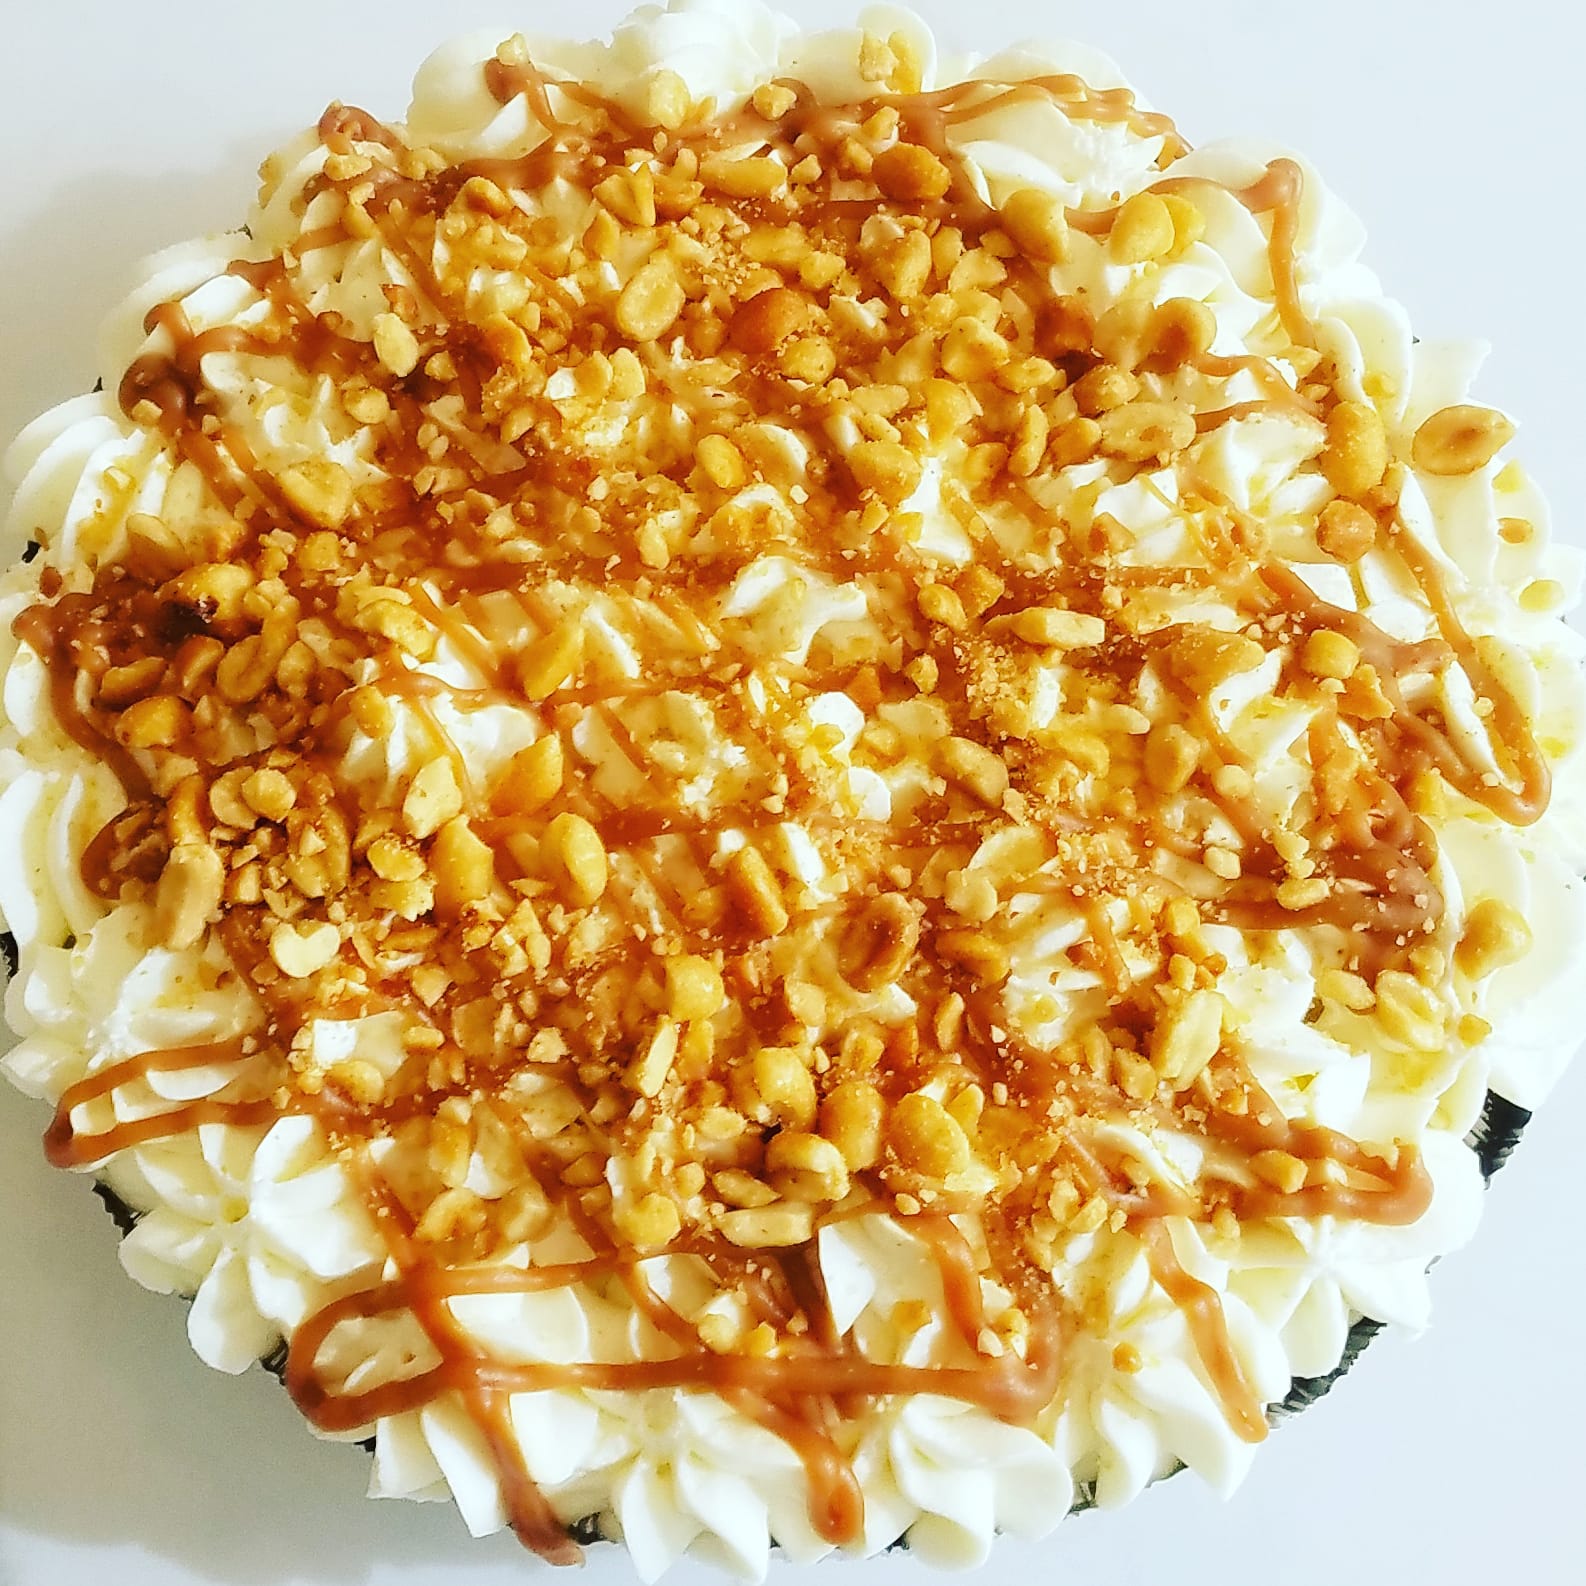 Overhead view of whole pie covered with whipped cream, caramel, and peanuts